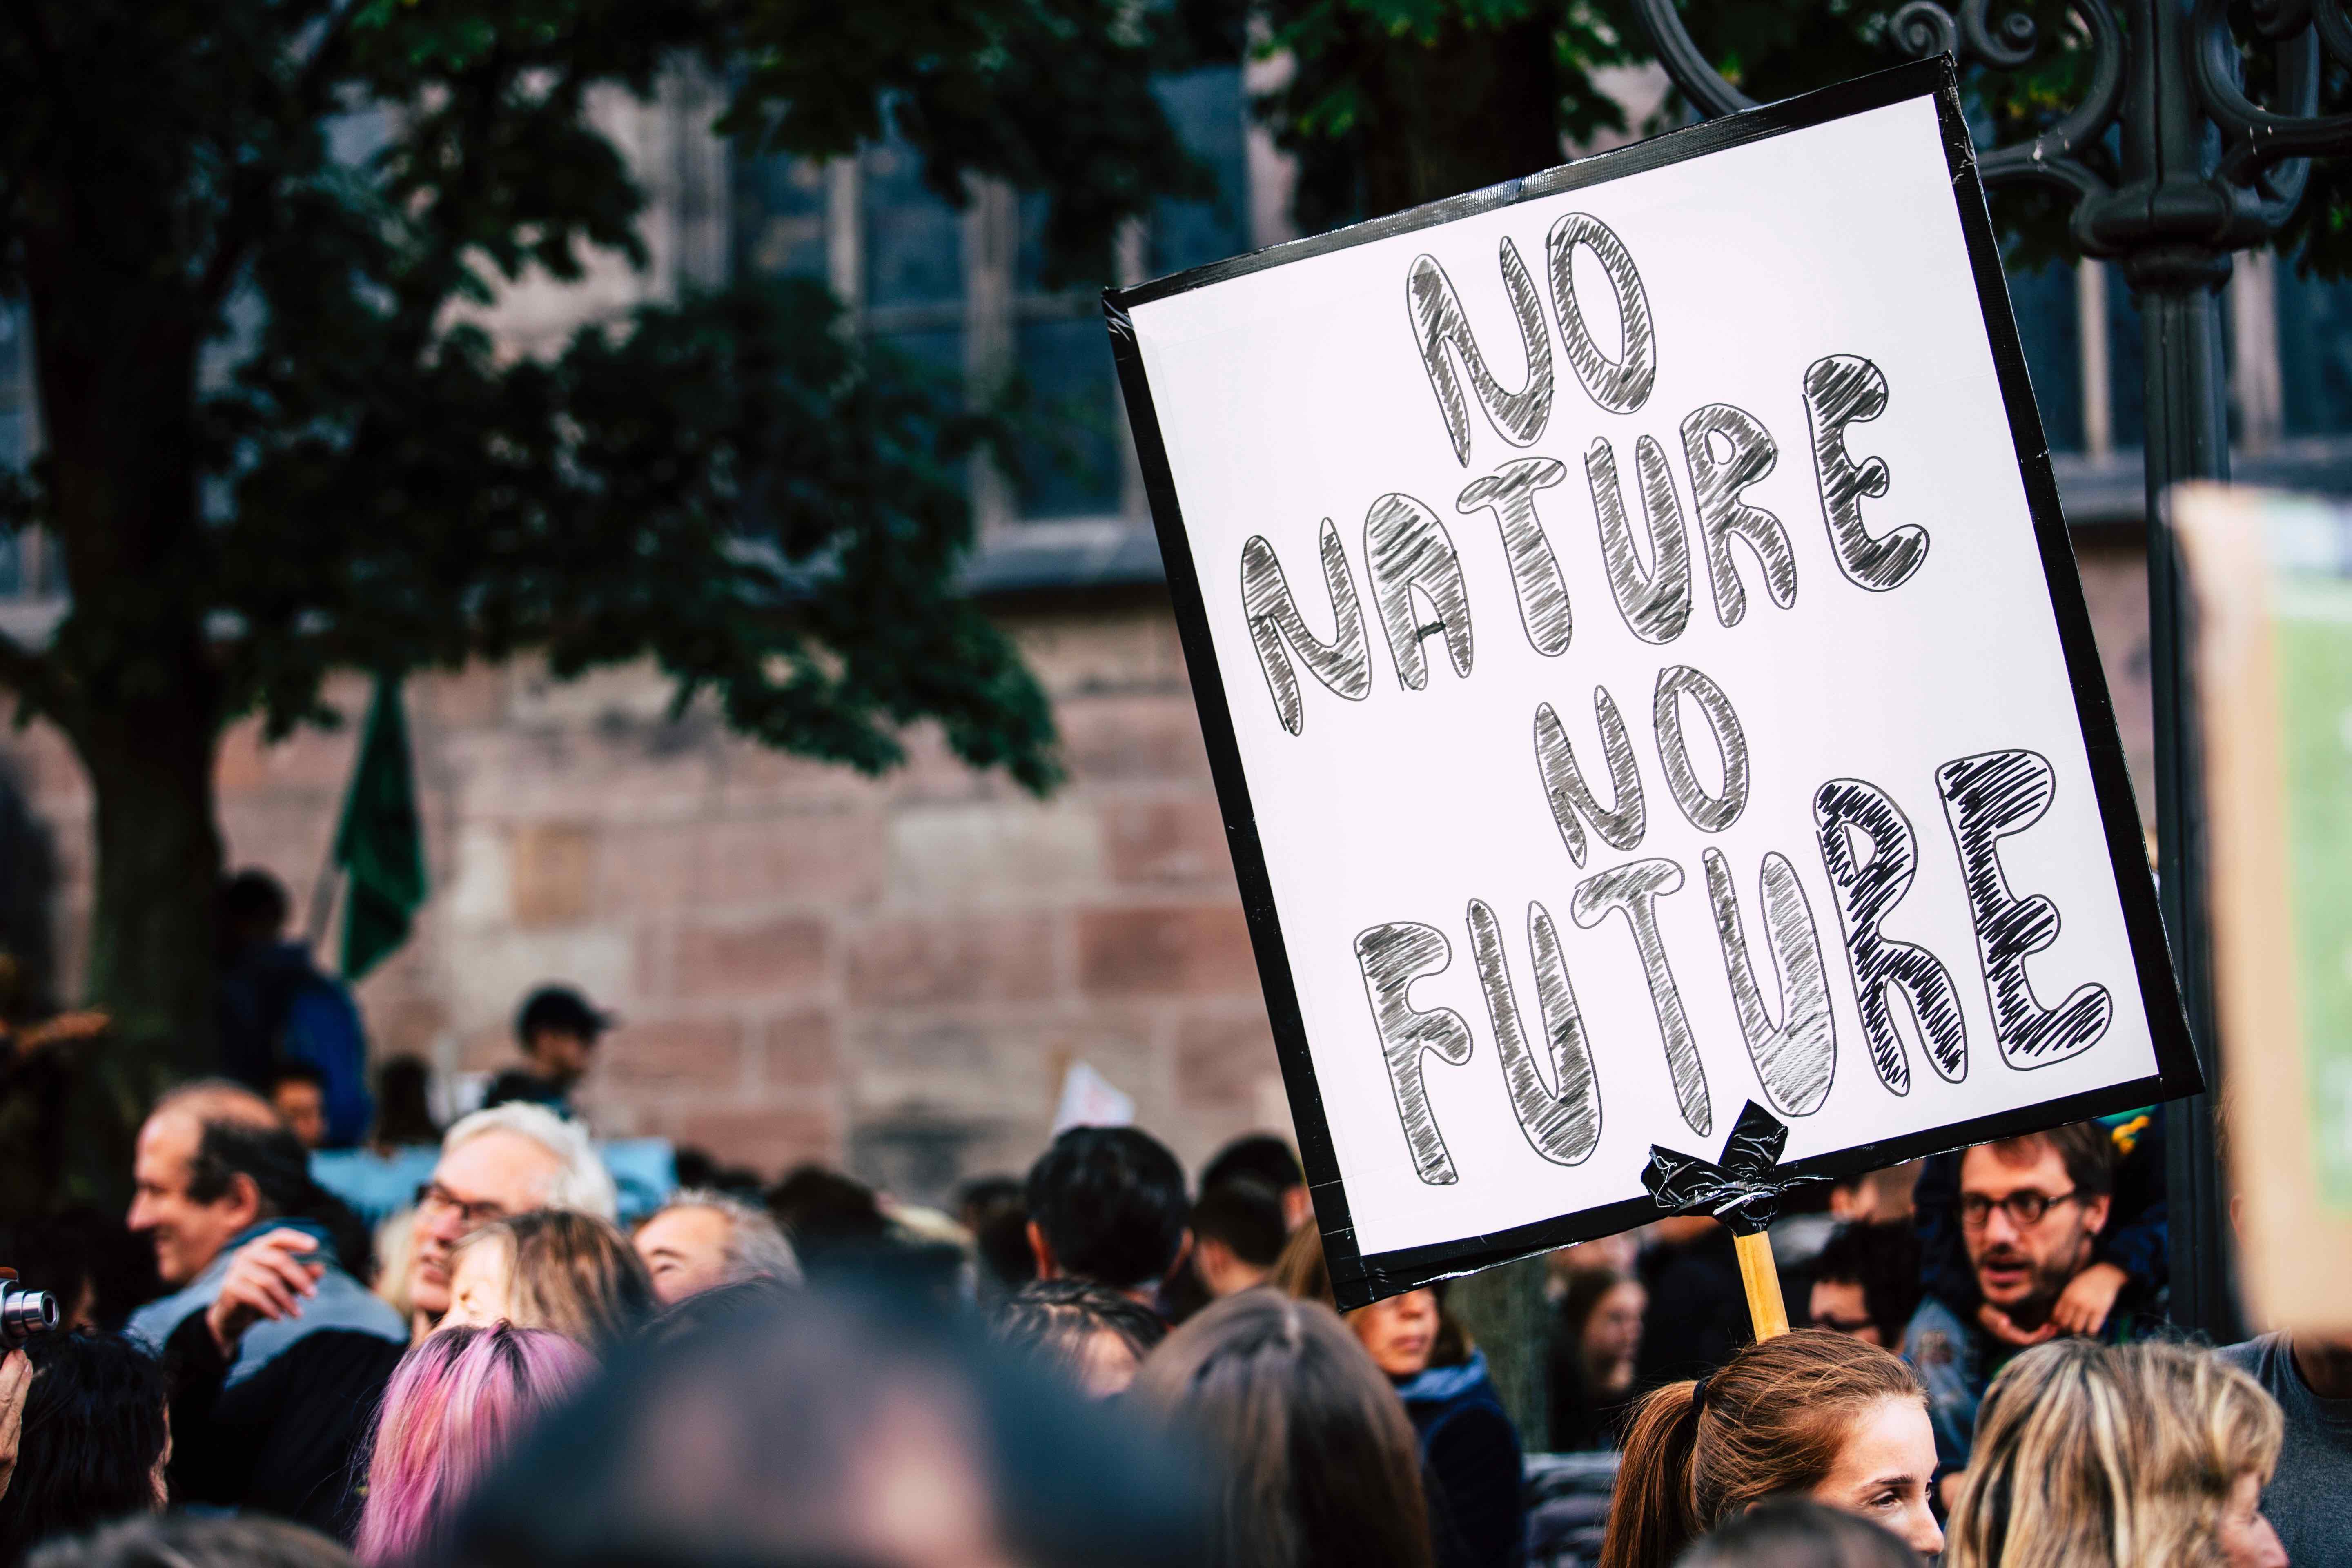 Someone holding a protest sign: No Nature No Future